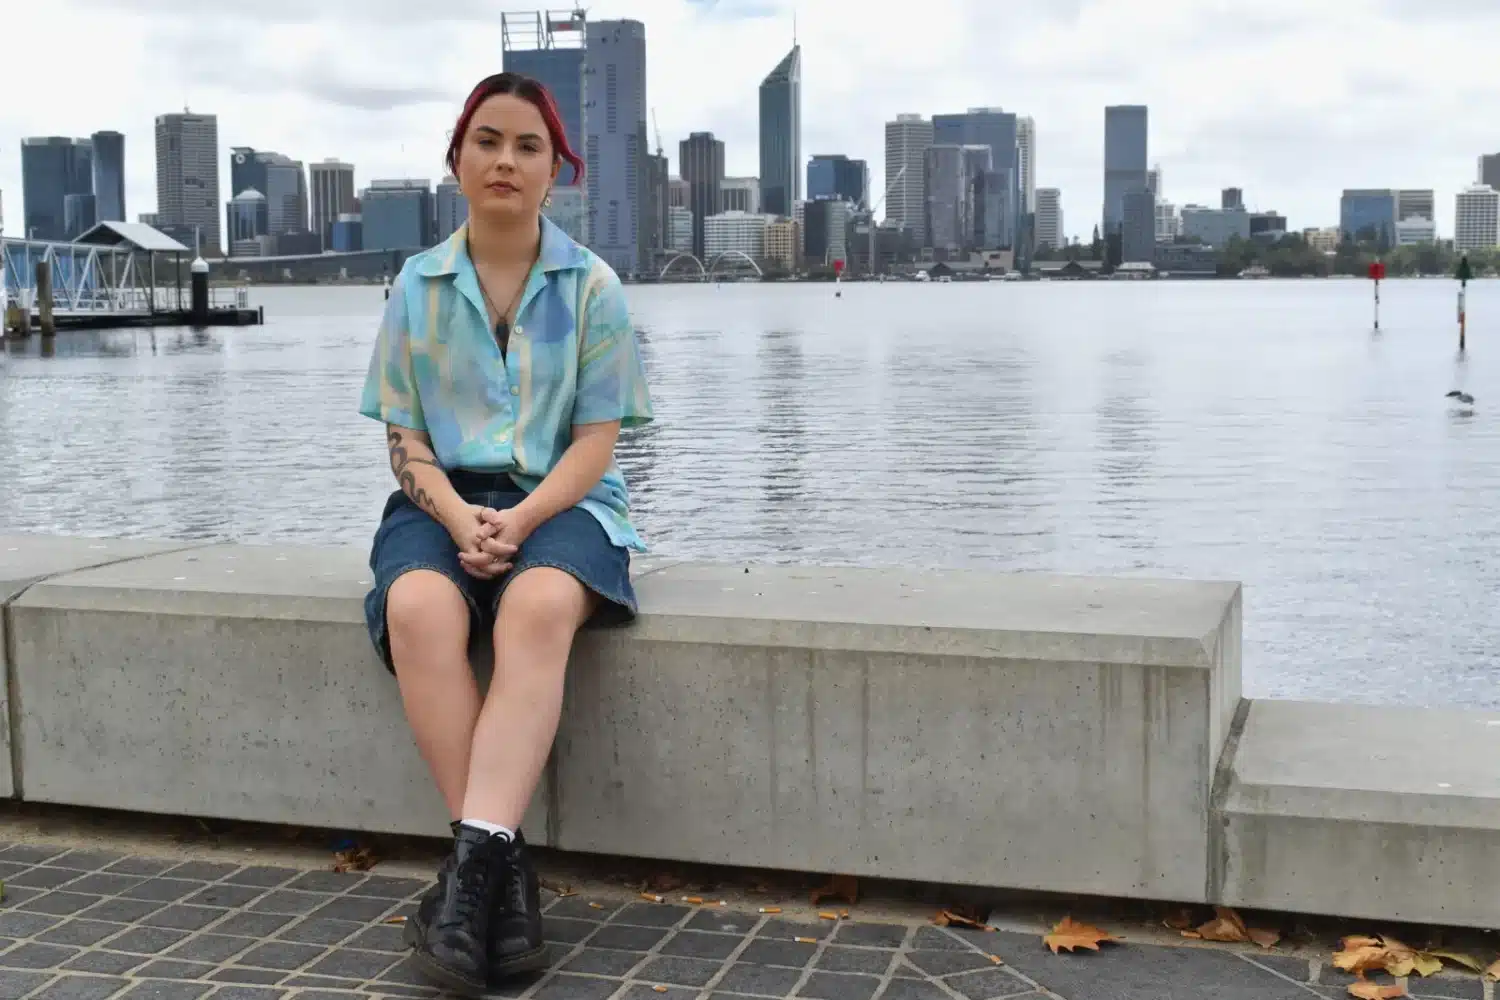 Finlaey Hewlett sits on a bench in front of the swan river. They are wearing a blue top and denim shorts.